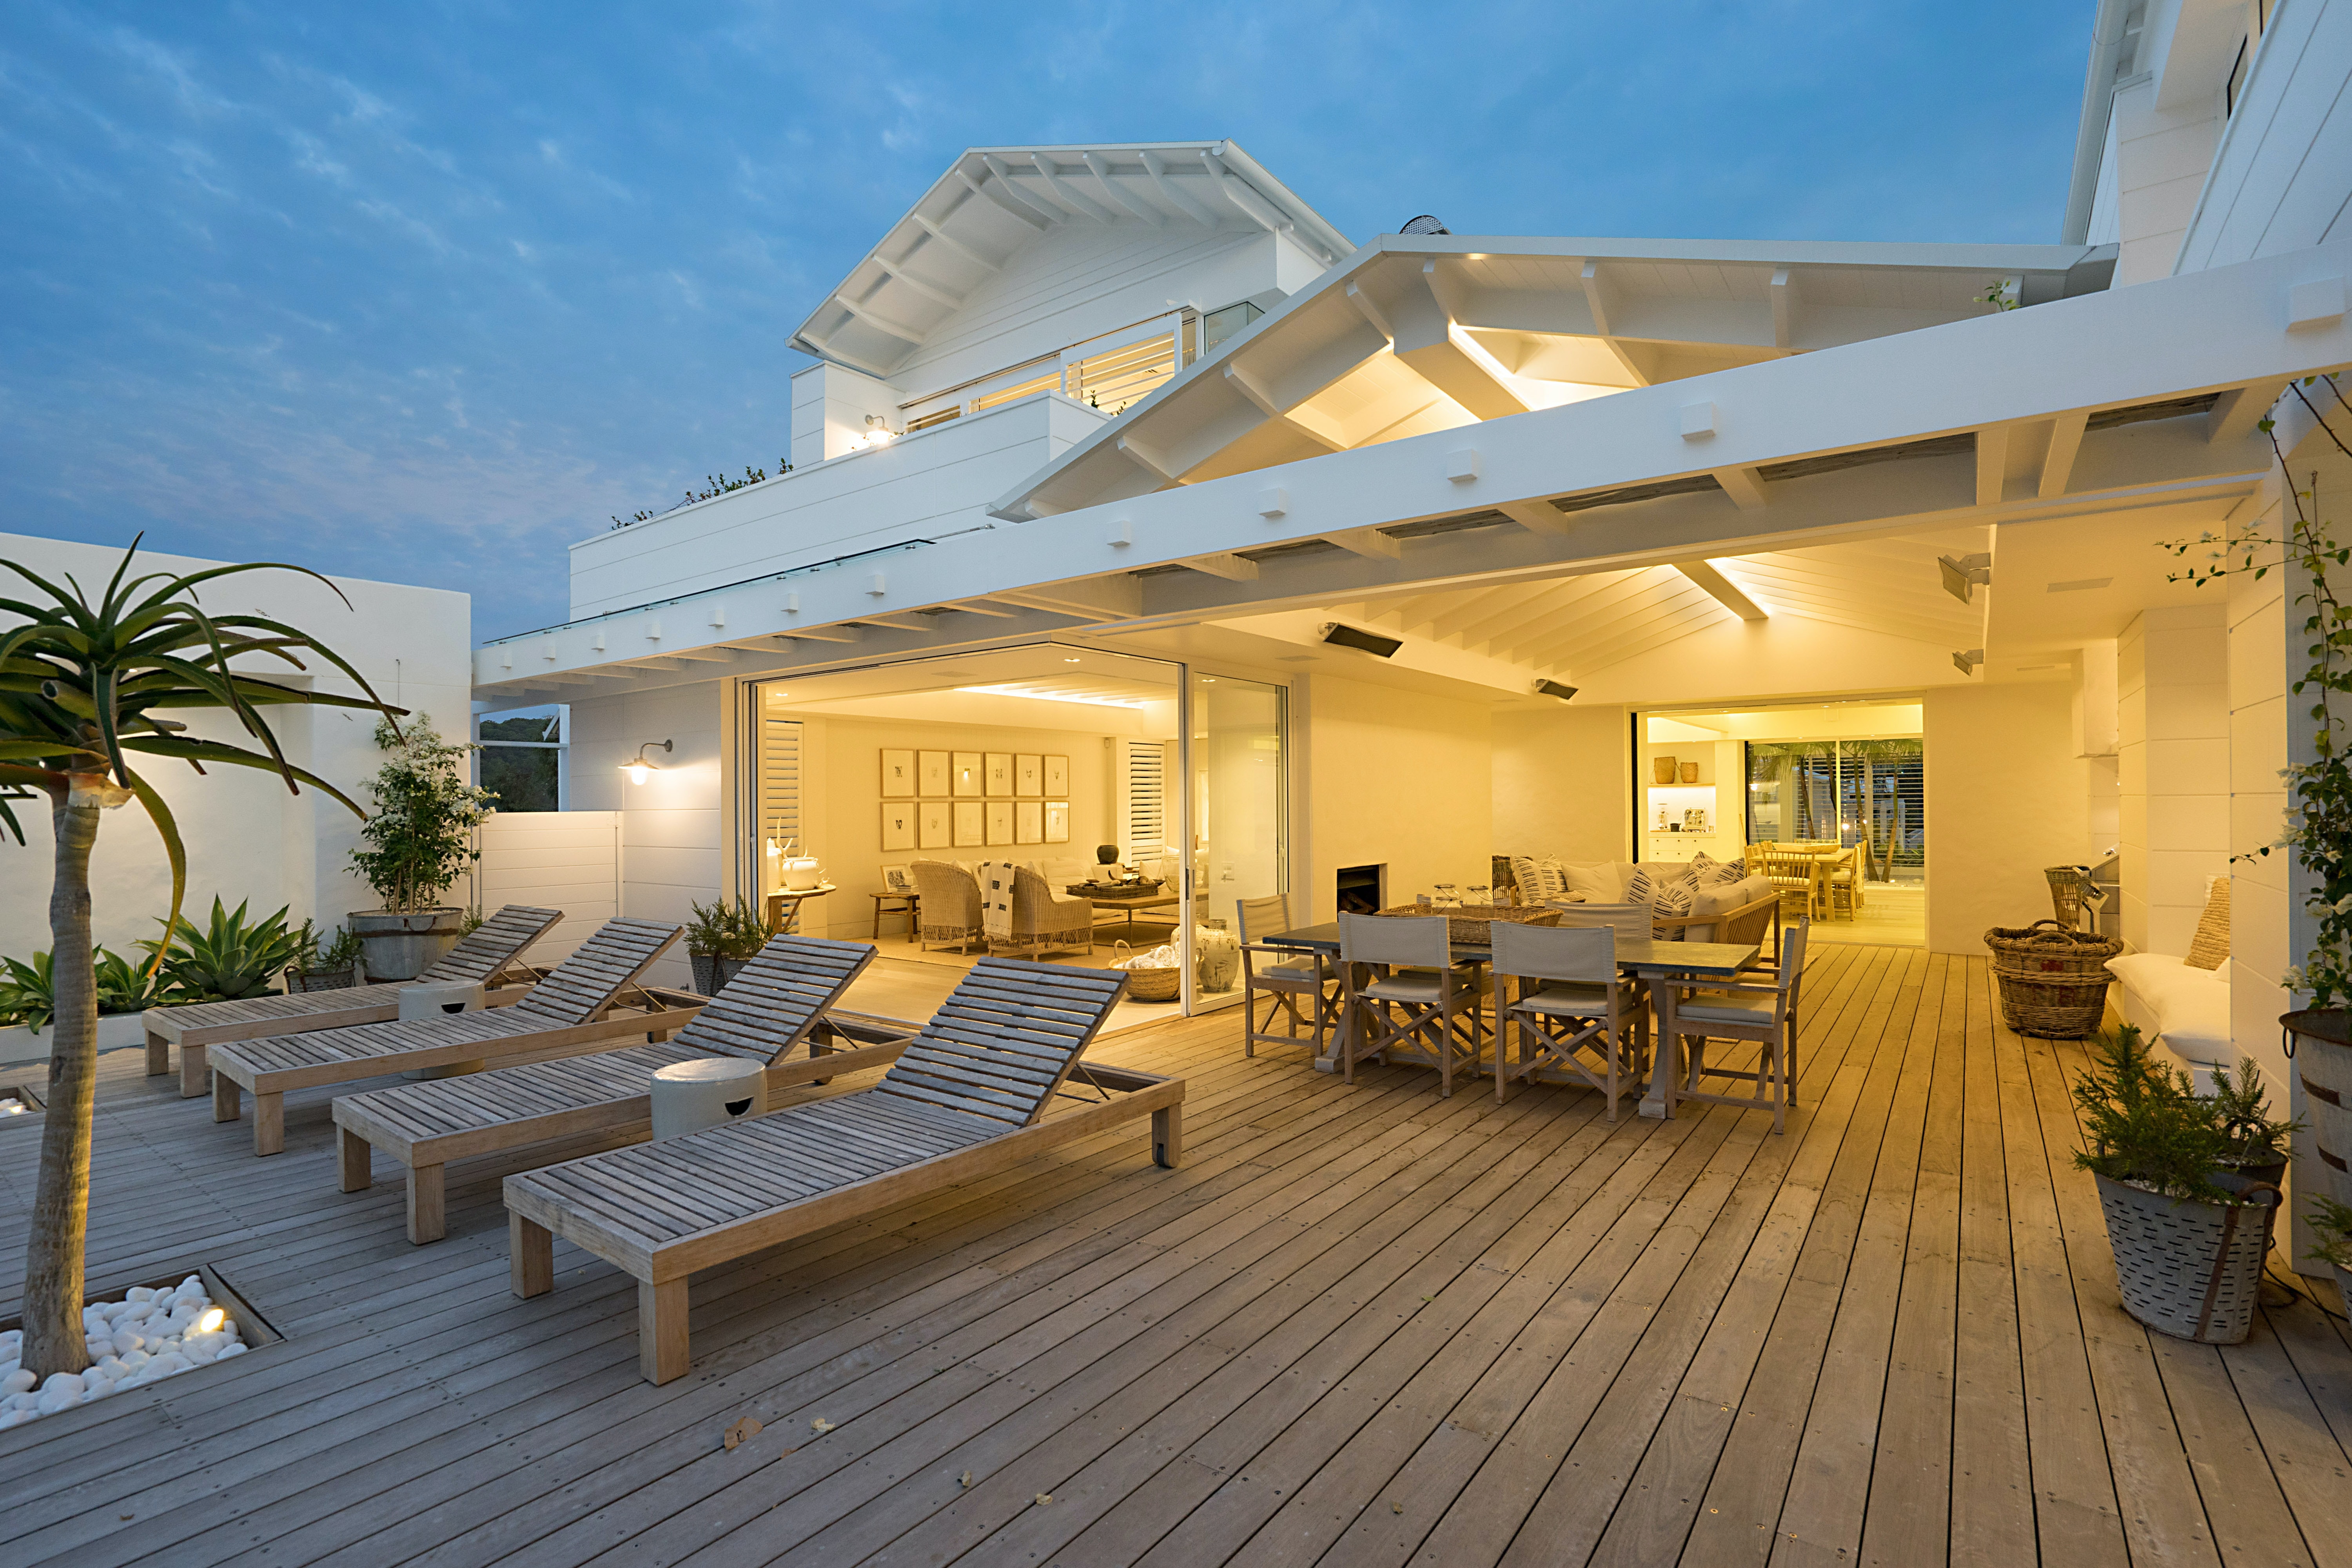 Outdoor decking area and entertainment